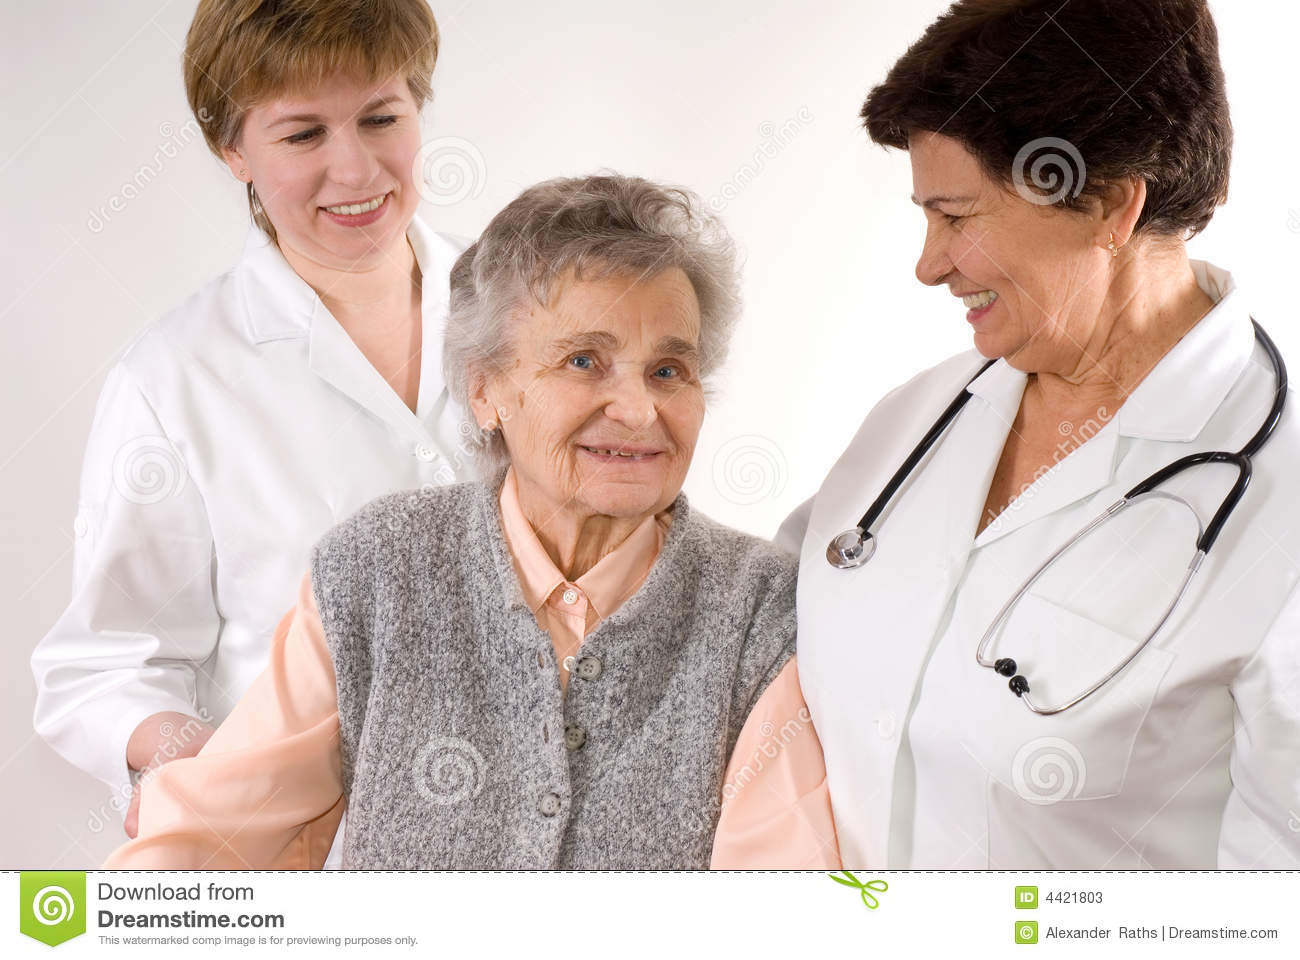 Health Care Workers Stock Photos   Image  4421803